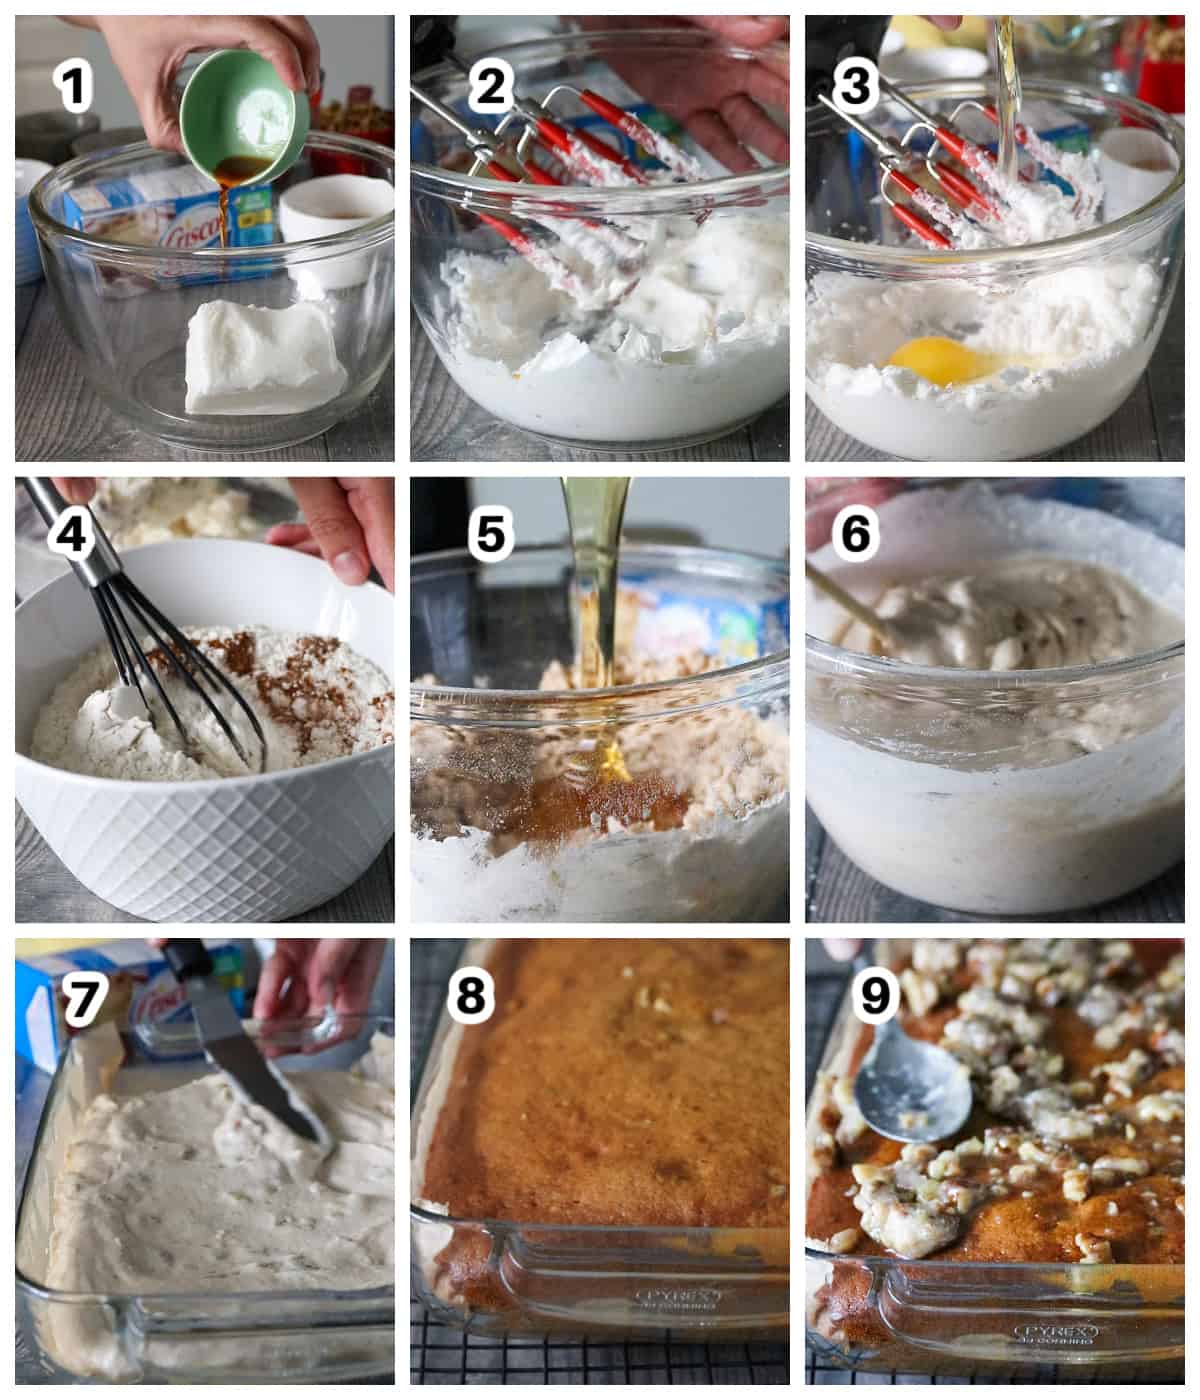 The step by step process for making honey walnut cake.